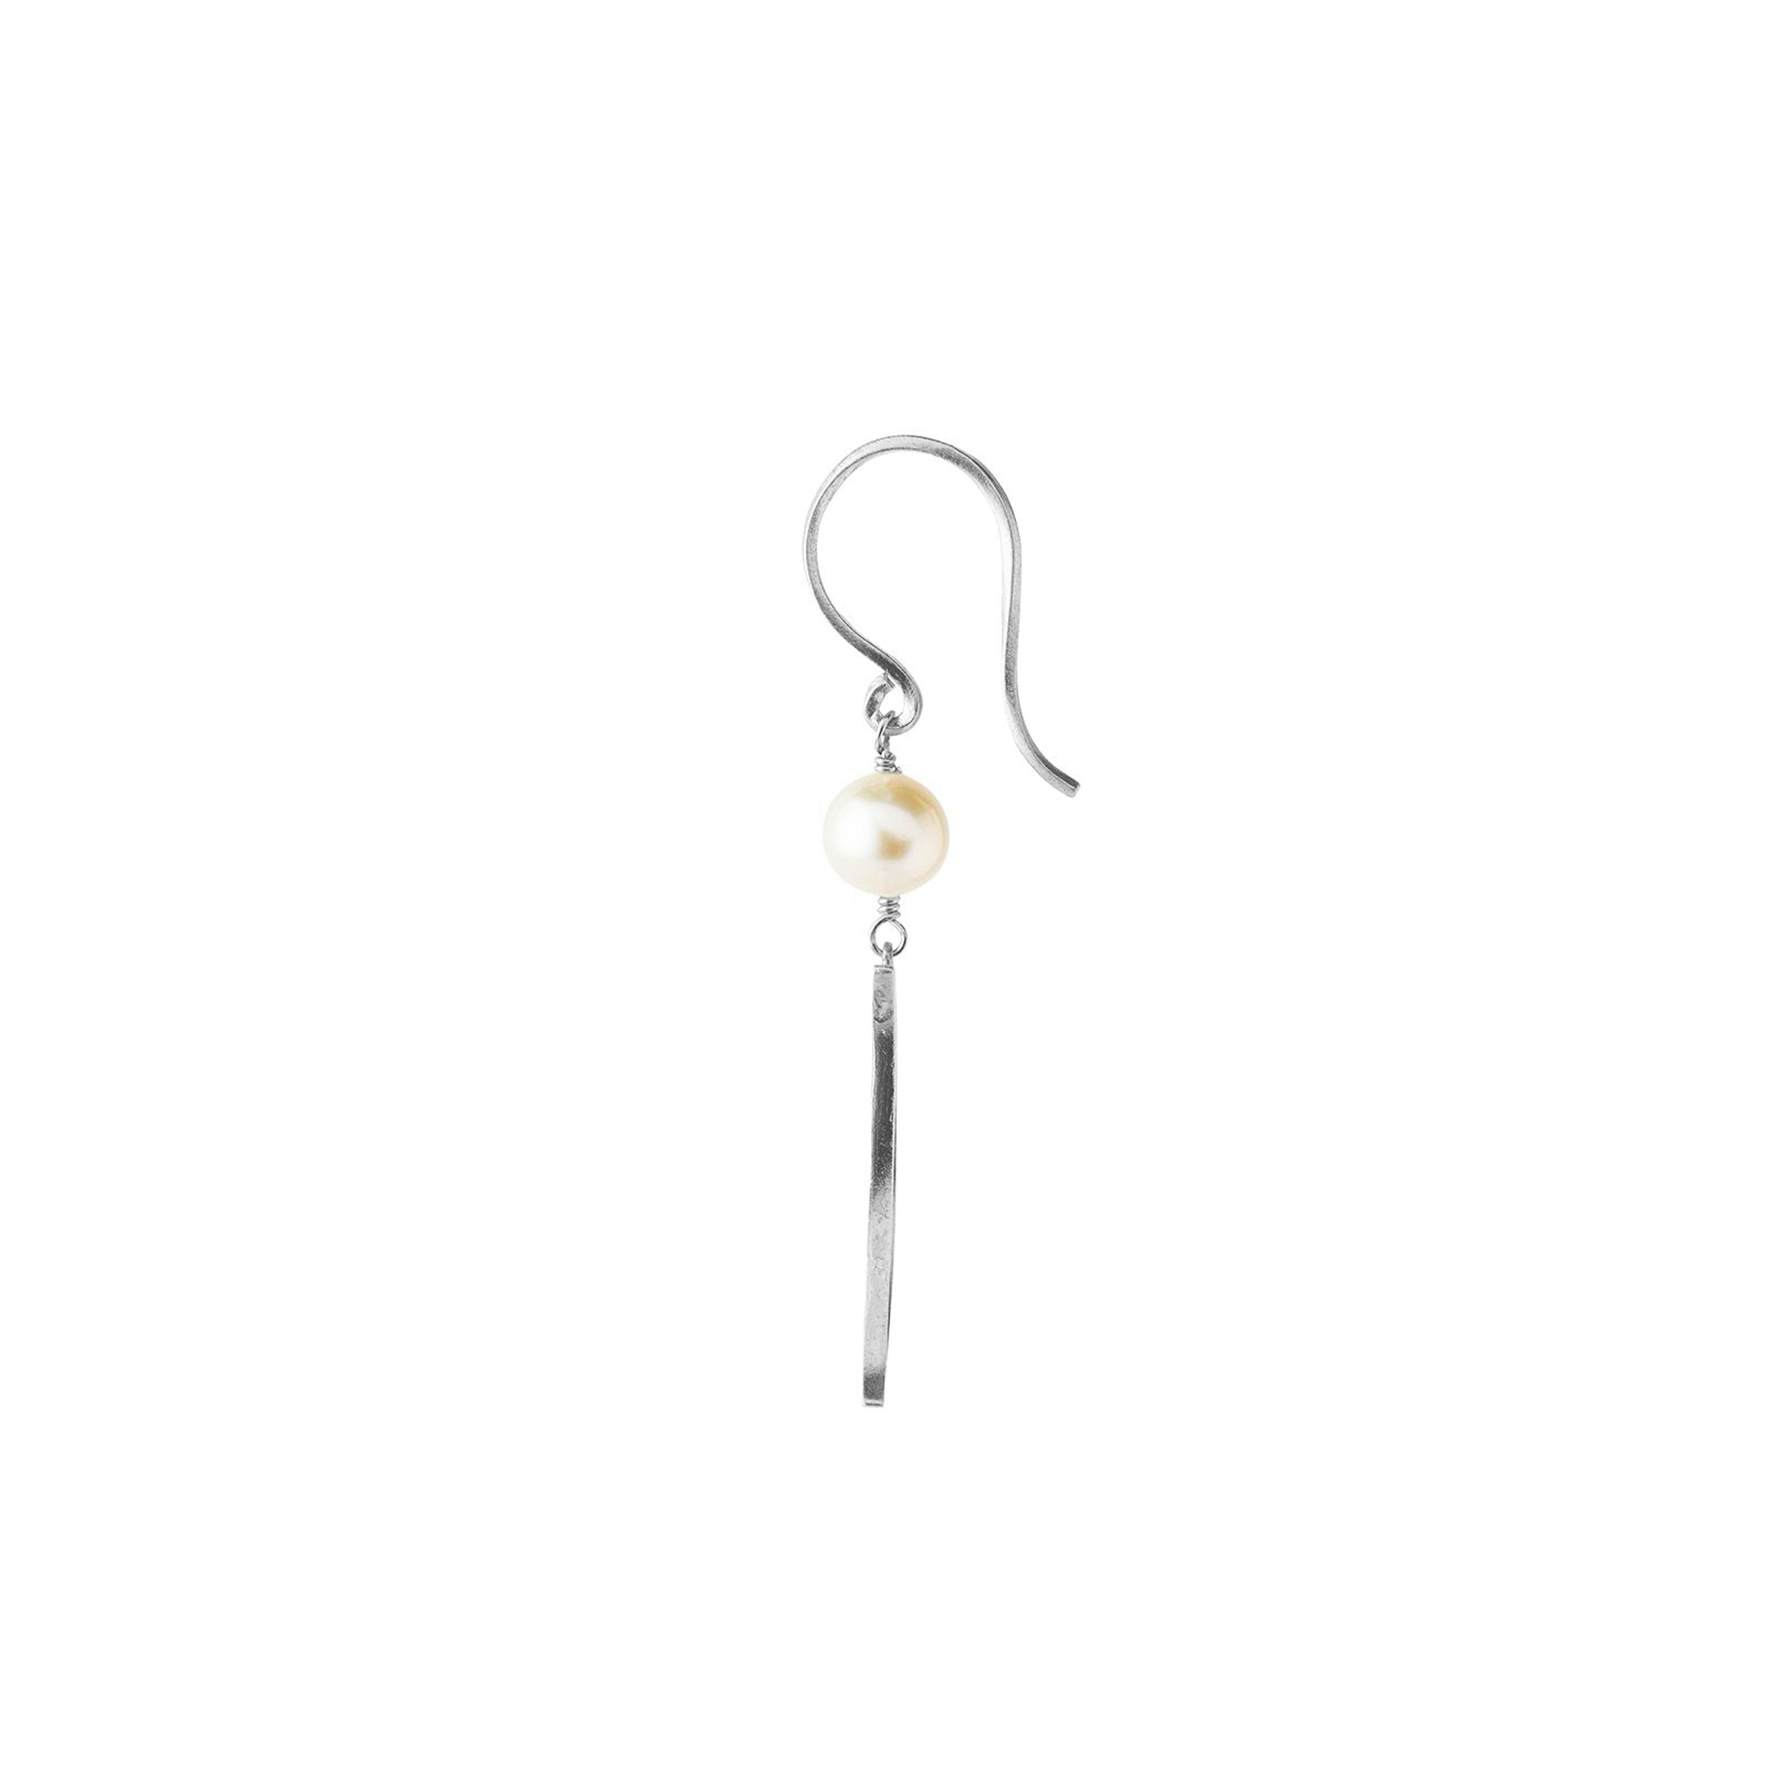 Bella Moon Earring With Pearl från STINE A Jewelry i Silver Sterling 925